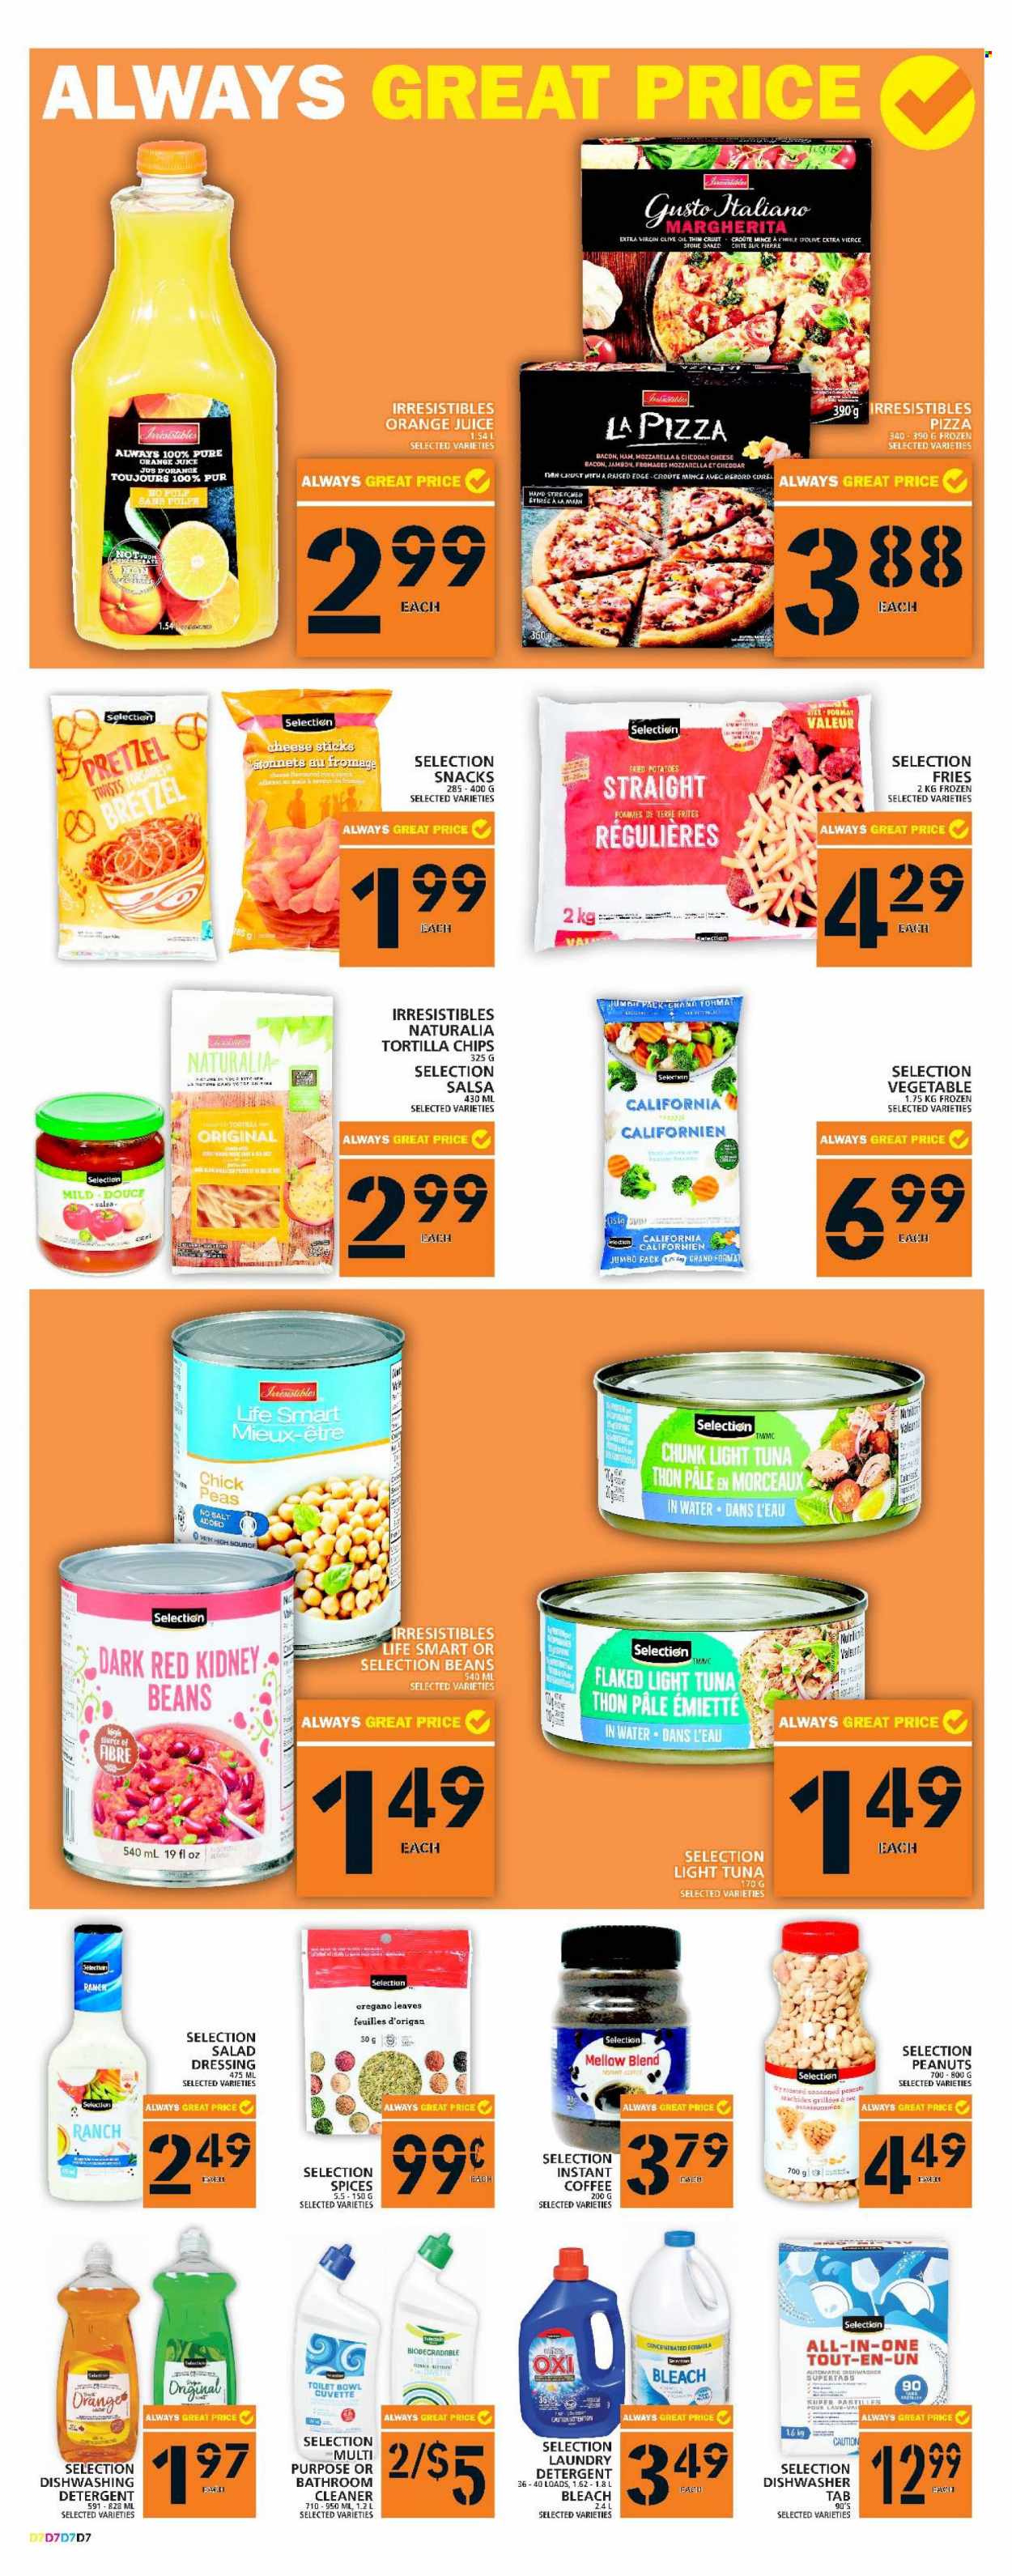 thumbnail - Food Basics Flyer - January 26, 2023 - February 01, 2023 - Sales products - pretzels, potatoes, peas, tuna, pizza, bacon, ham, cheese sticks, potato fries, snack, tortilla chips, kidney beans, light tuna, salad dressing, dressing, salsa, extra virgin olive oil, oil, peanuts, orange juice, juice, coffee, instant coffee, cleaner, bleach, laundry detergent, detergent. Page 9.